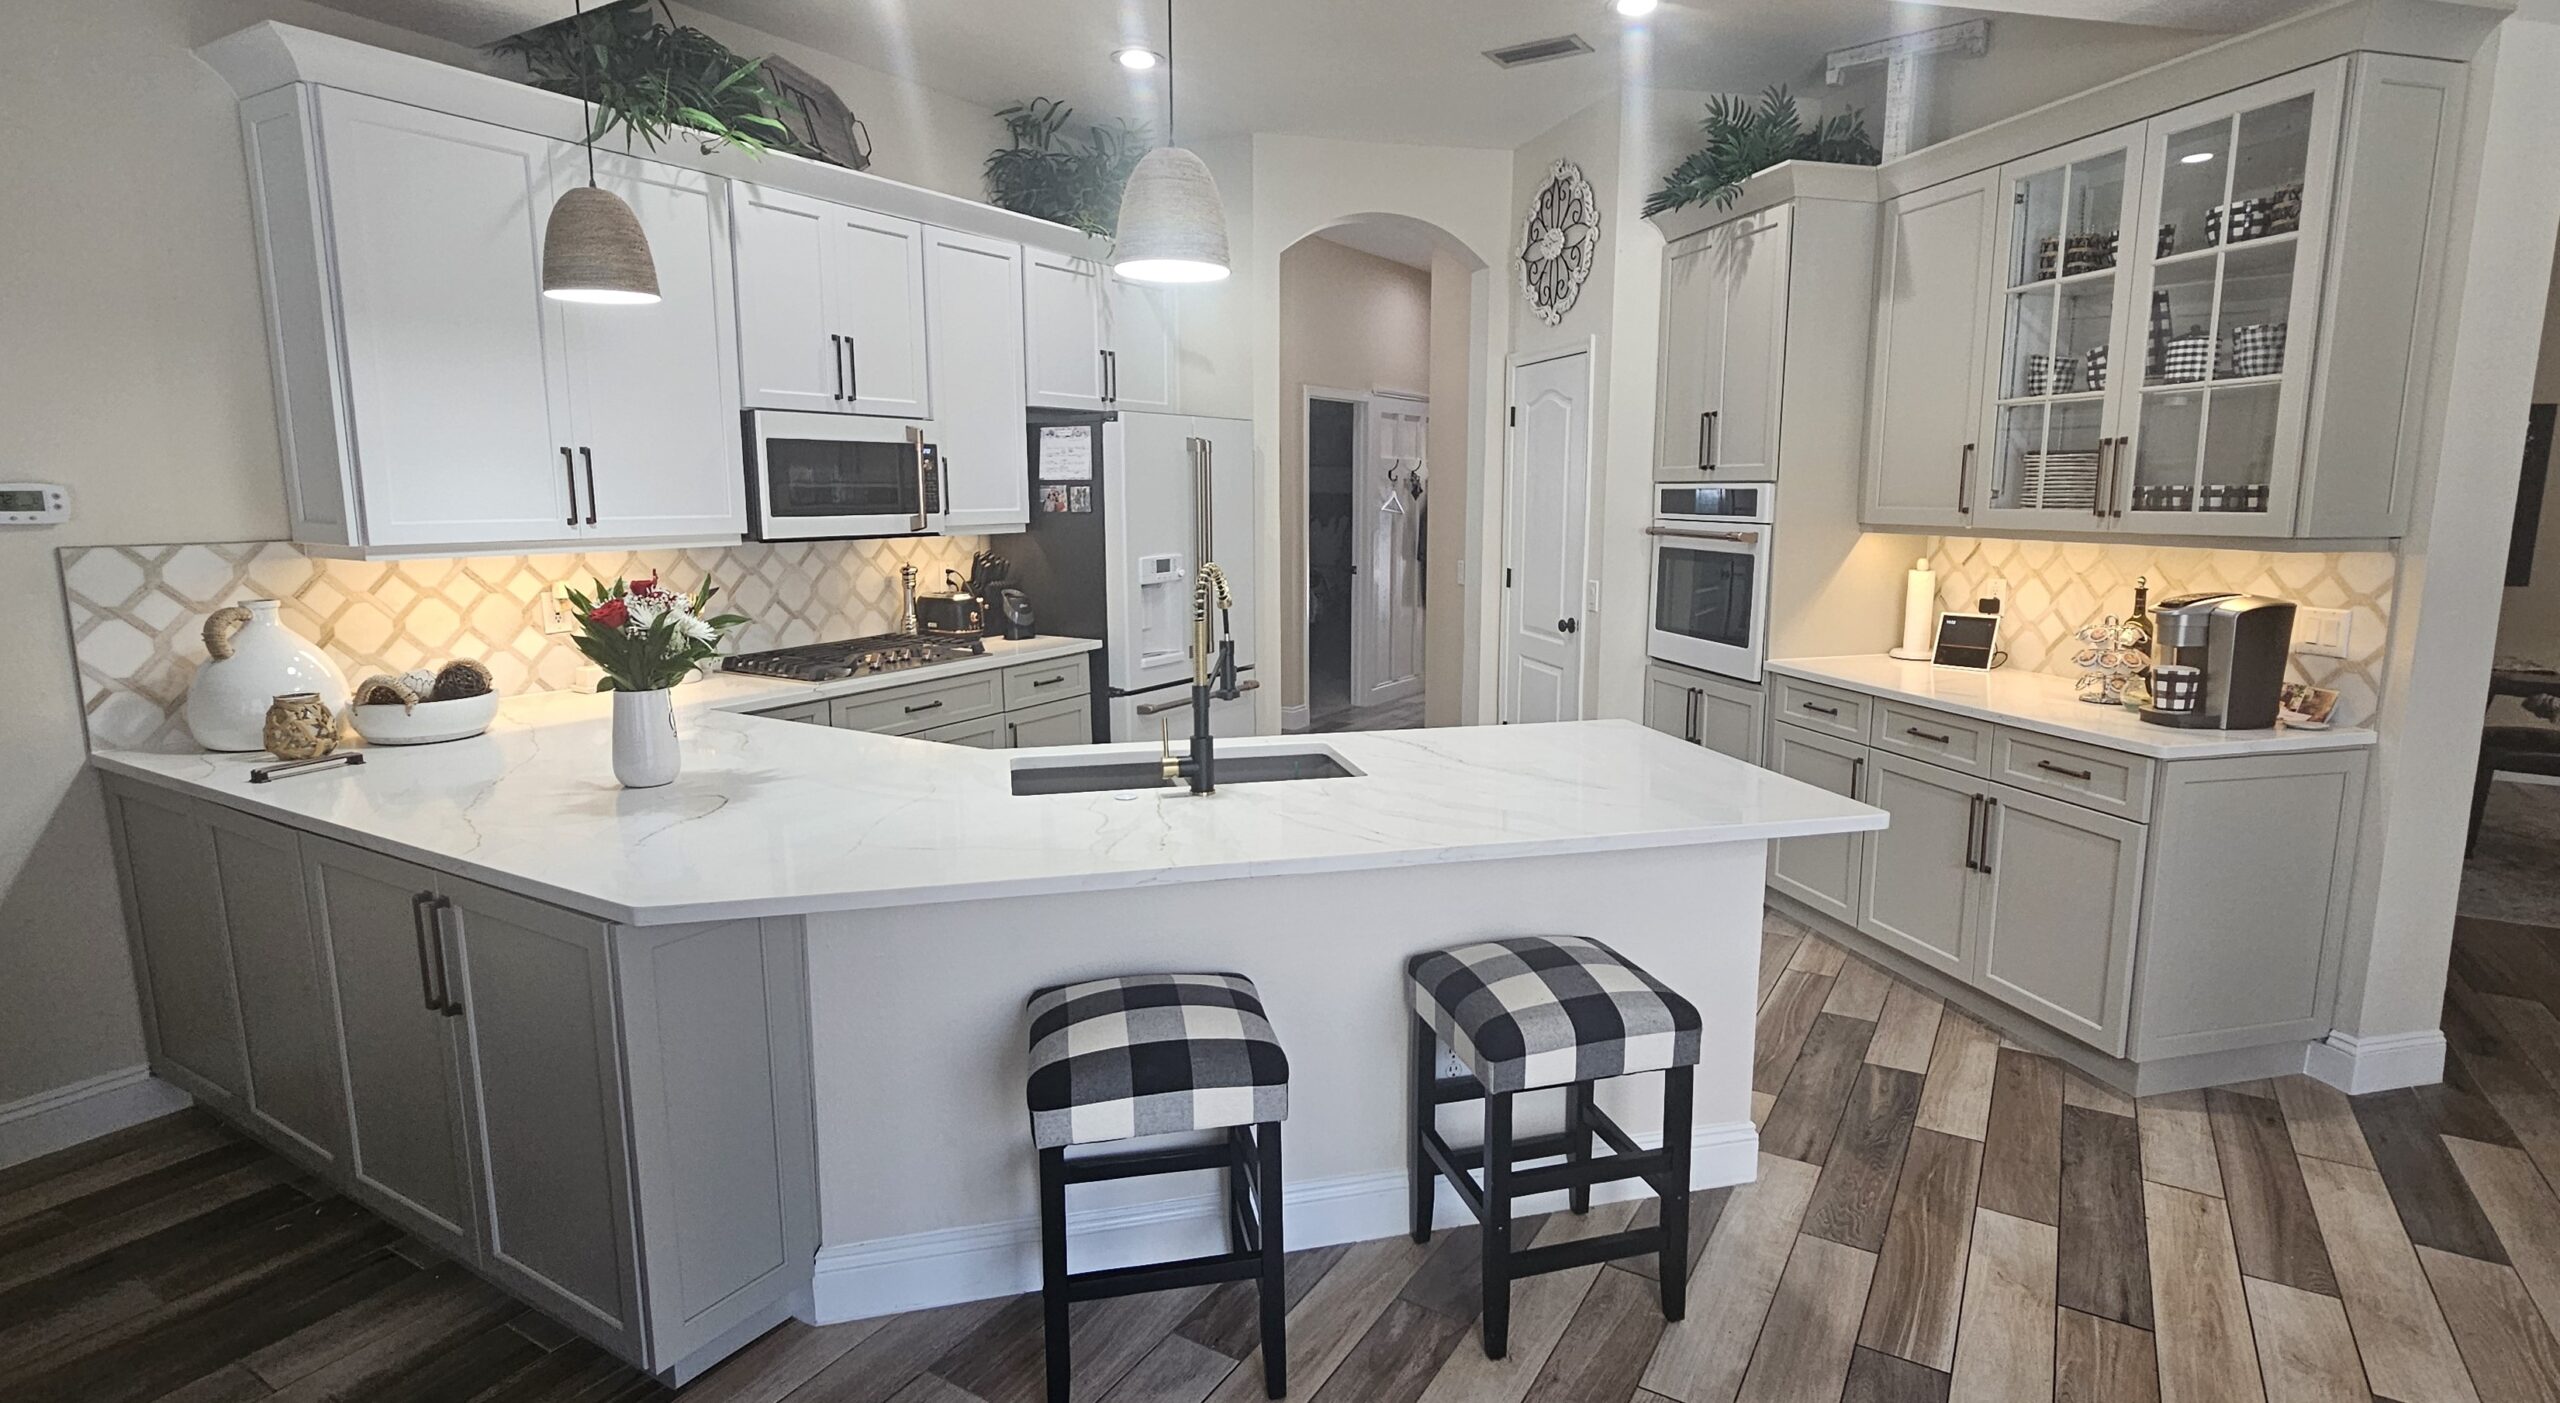 Modern appliances with a high-quality finish, granite worktops, and sleek white cabinet doors in Dunedin 